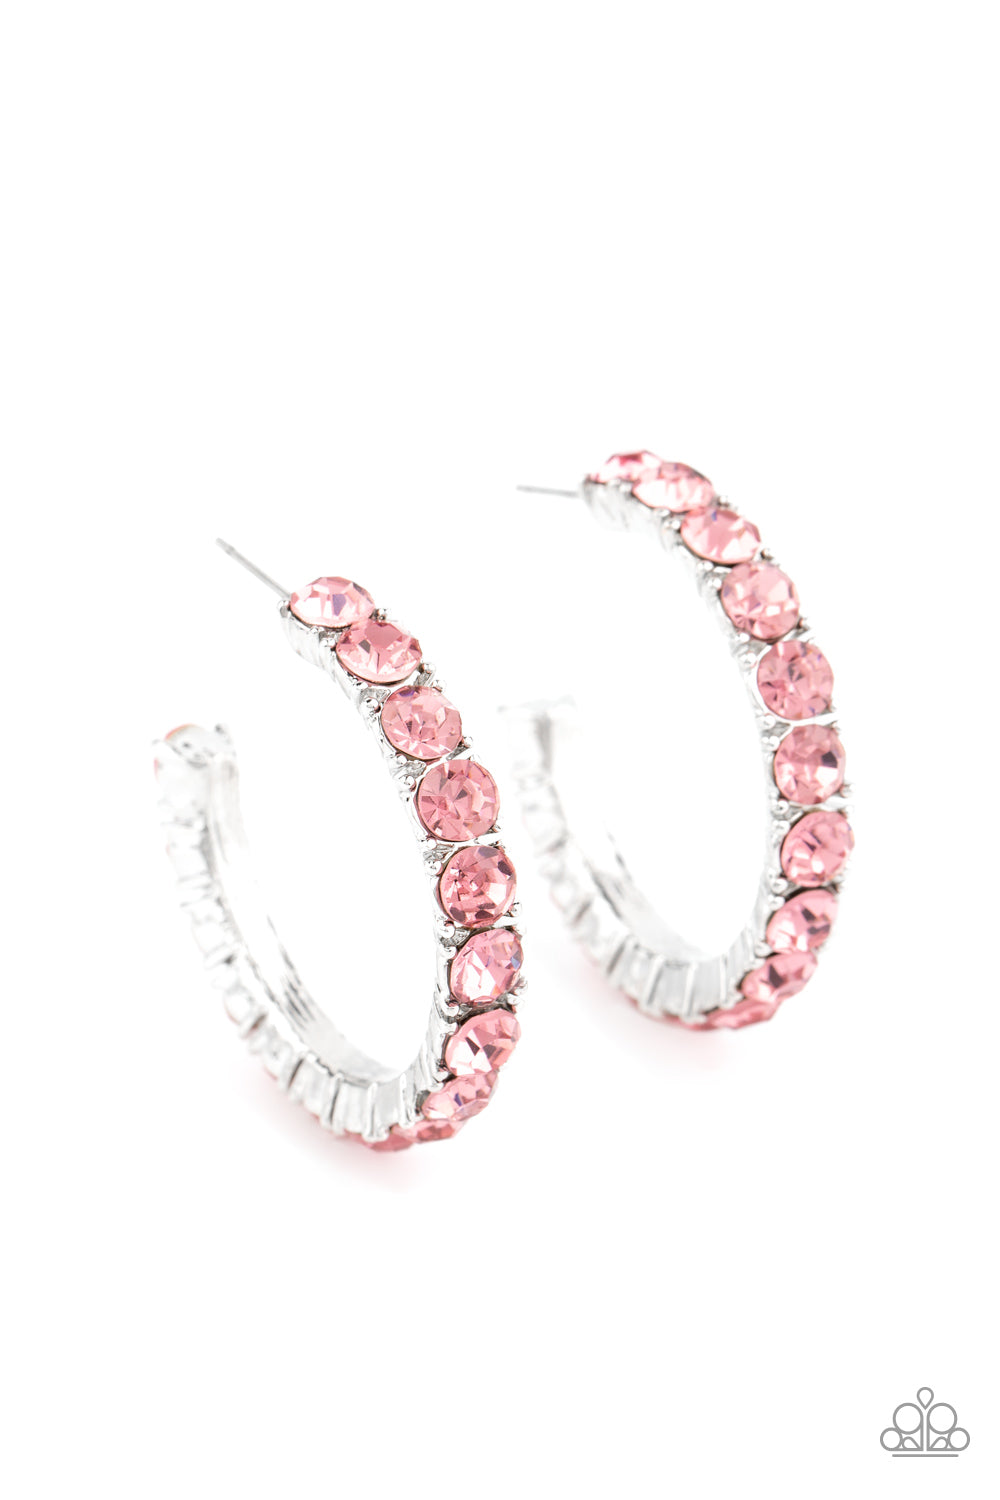 CLASSY is in Session Pink Hoop Earring - Paparazzi Accessories